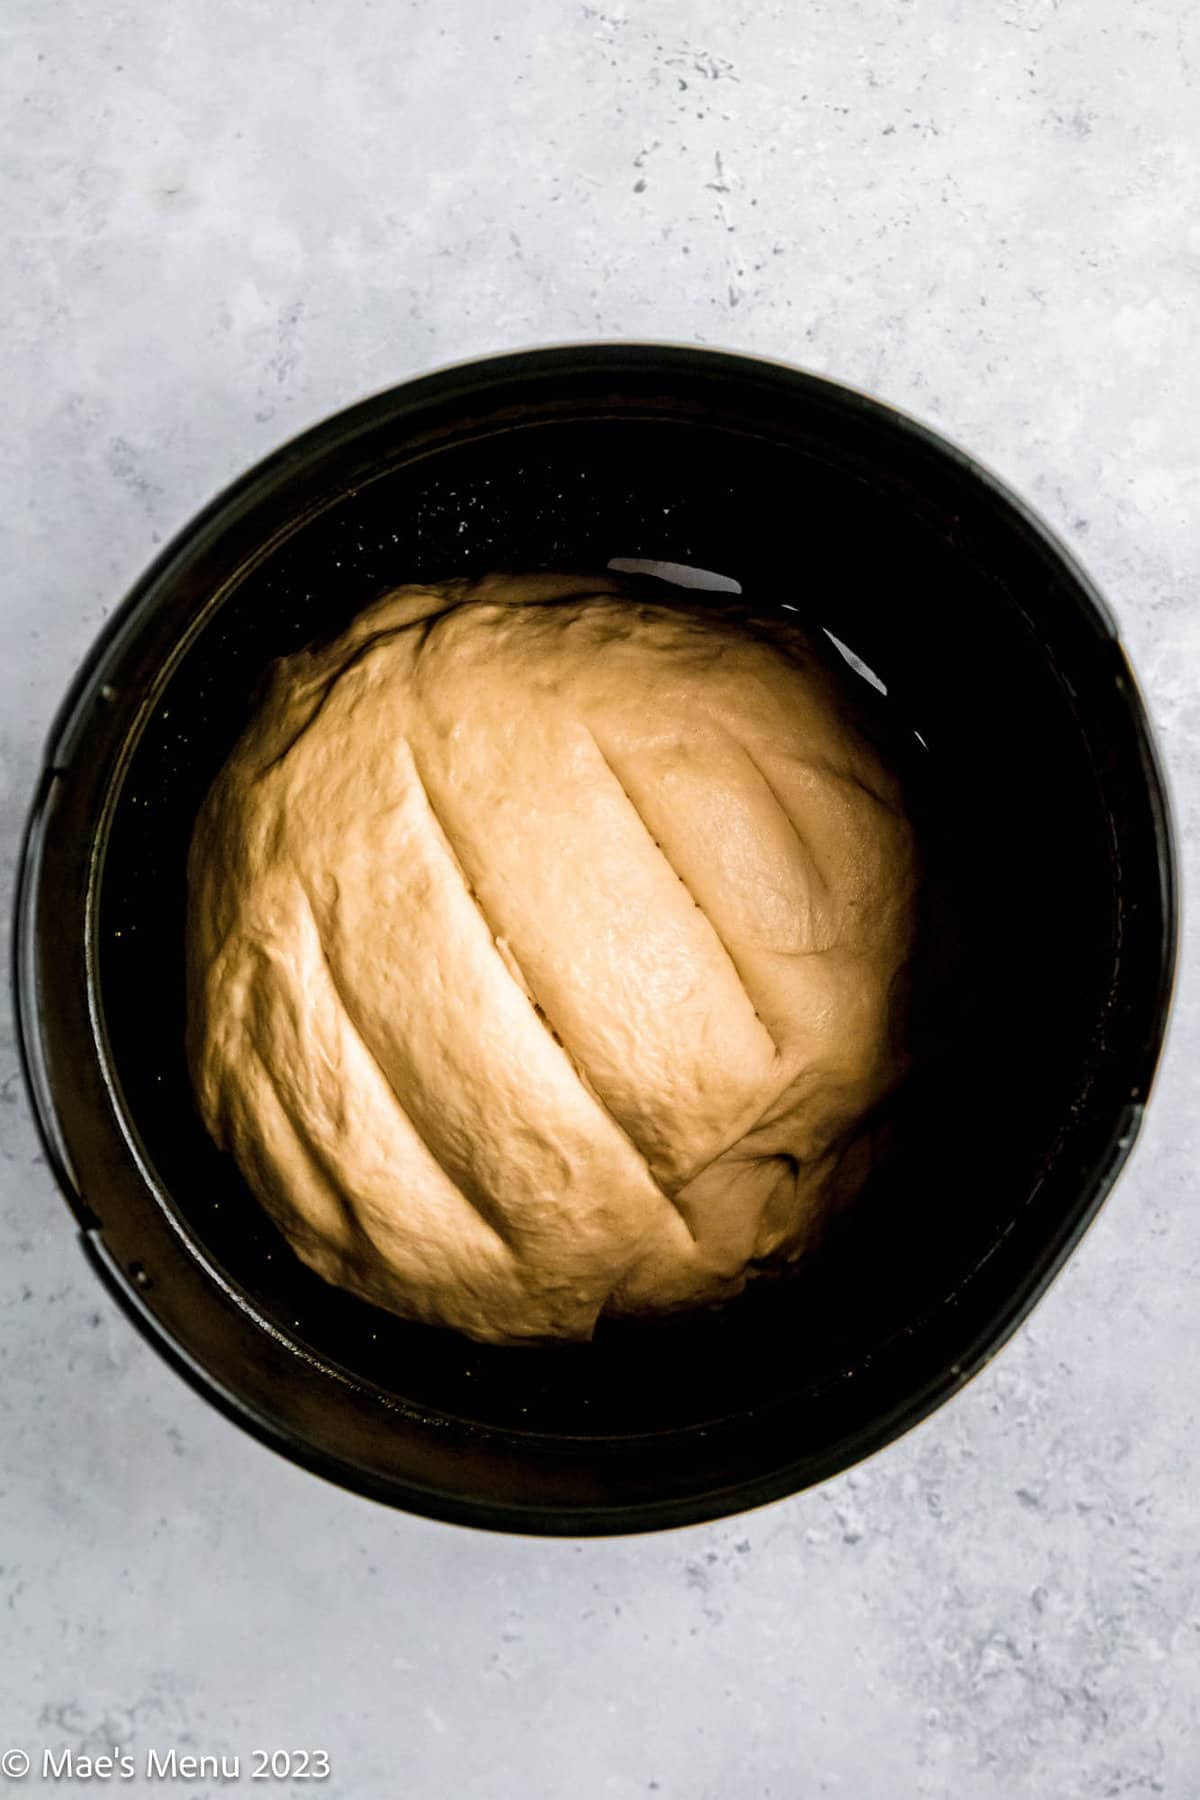 A loaf of air fryer bread in the air fryer basket before baking.